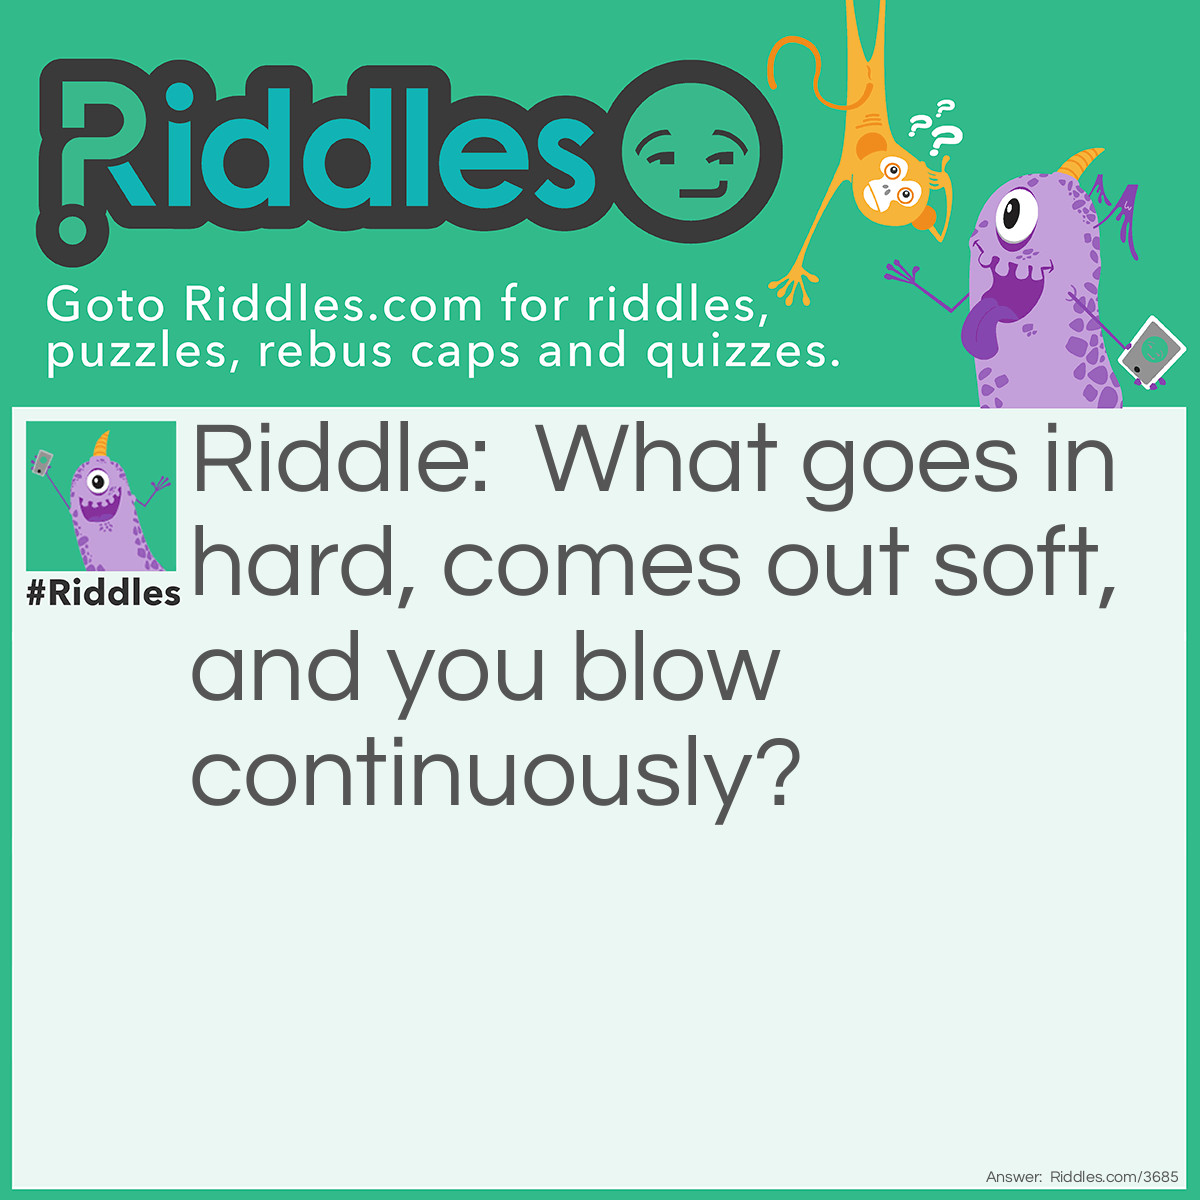 Riddle: What goes in hard, comes out soft, and you blow continuously? Answer: Bubble Gum.